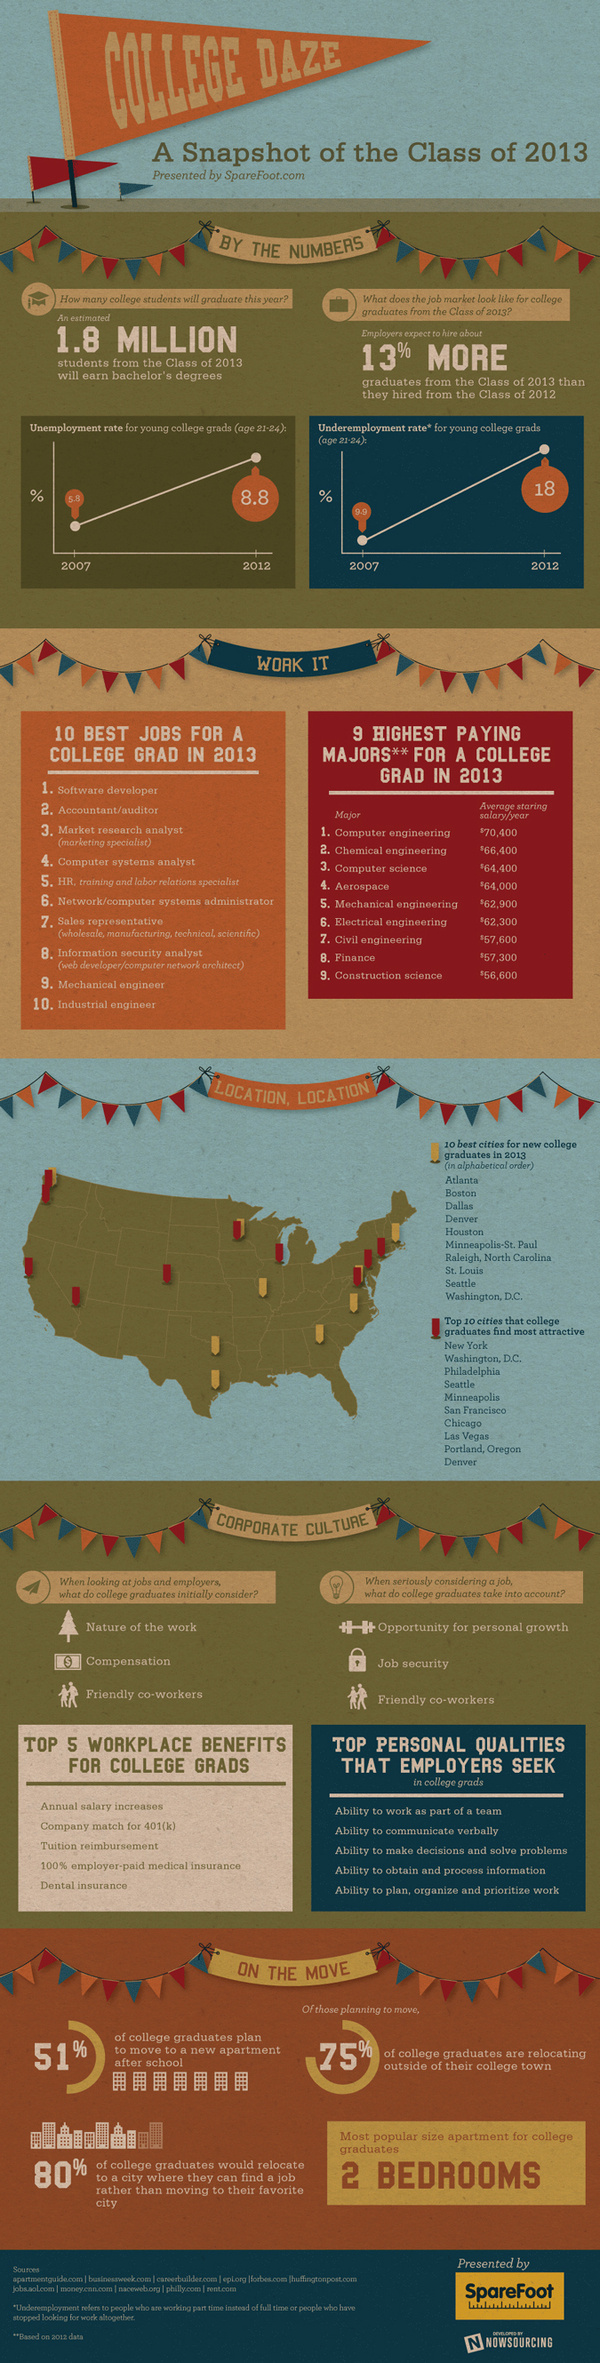 College Class of 2013 Infographic #infographic